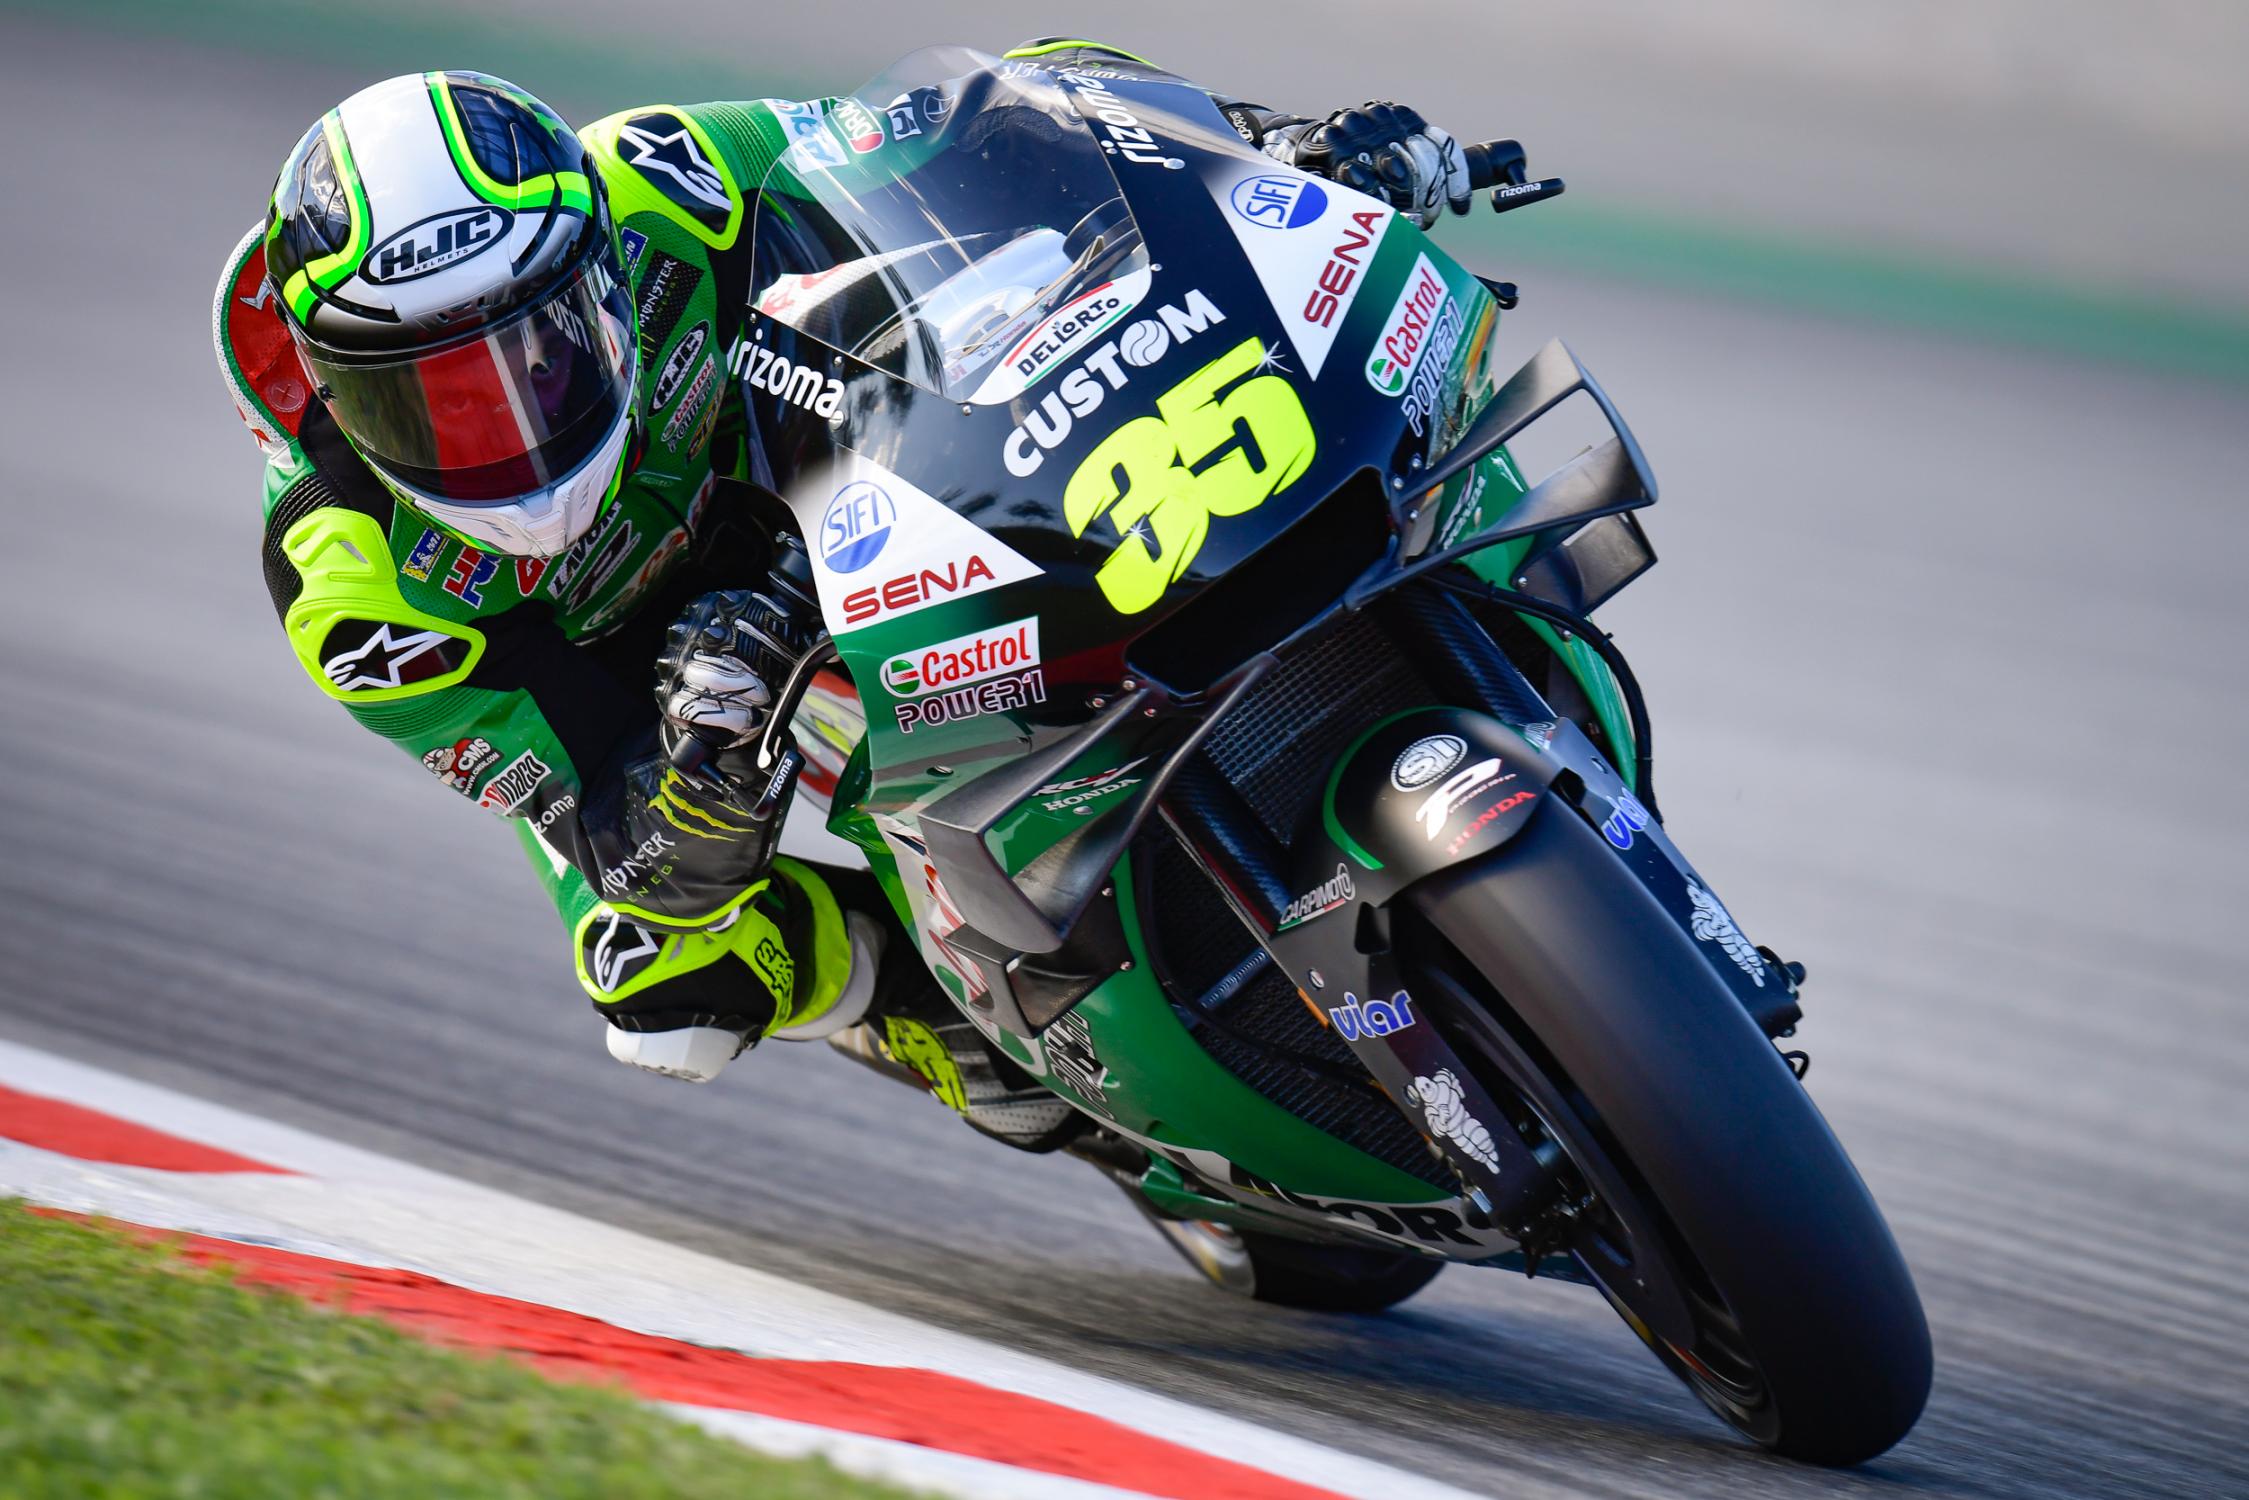 Crutchlow competitive on his return in Catalunya